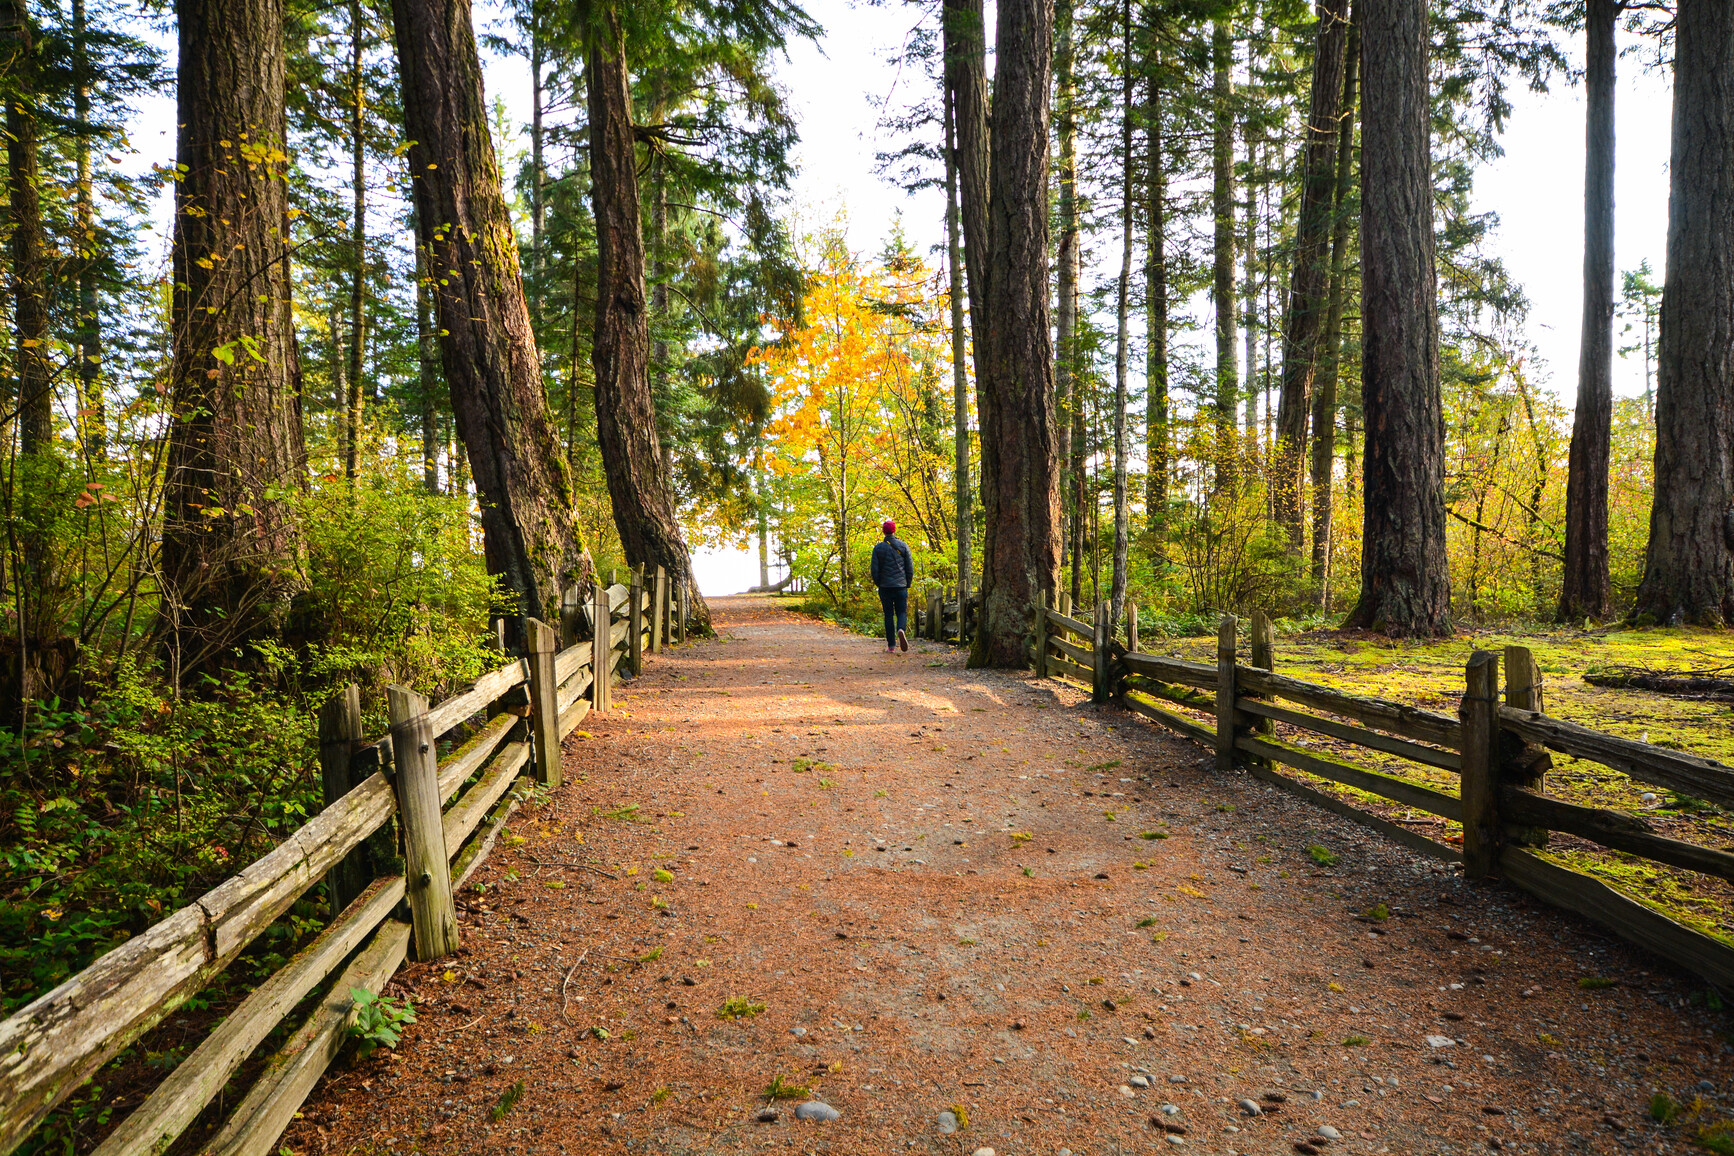 A park visitor walks a fence lined trail in Miracle Beach Park.